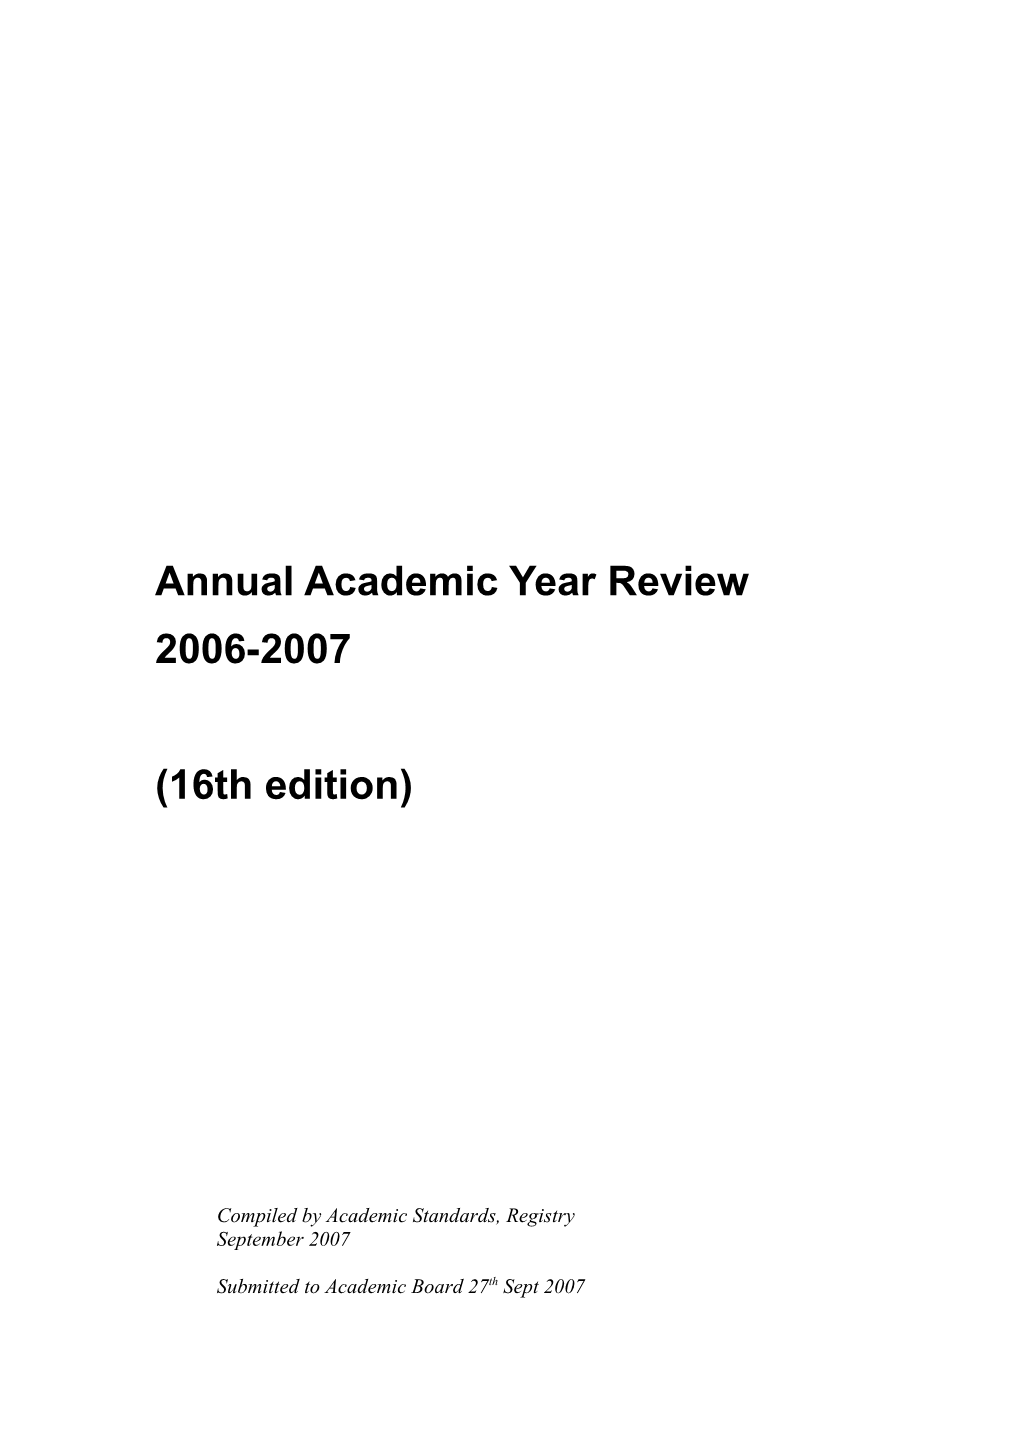 Annual Academic Year Review 2006-07